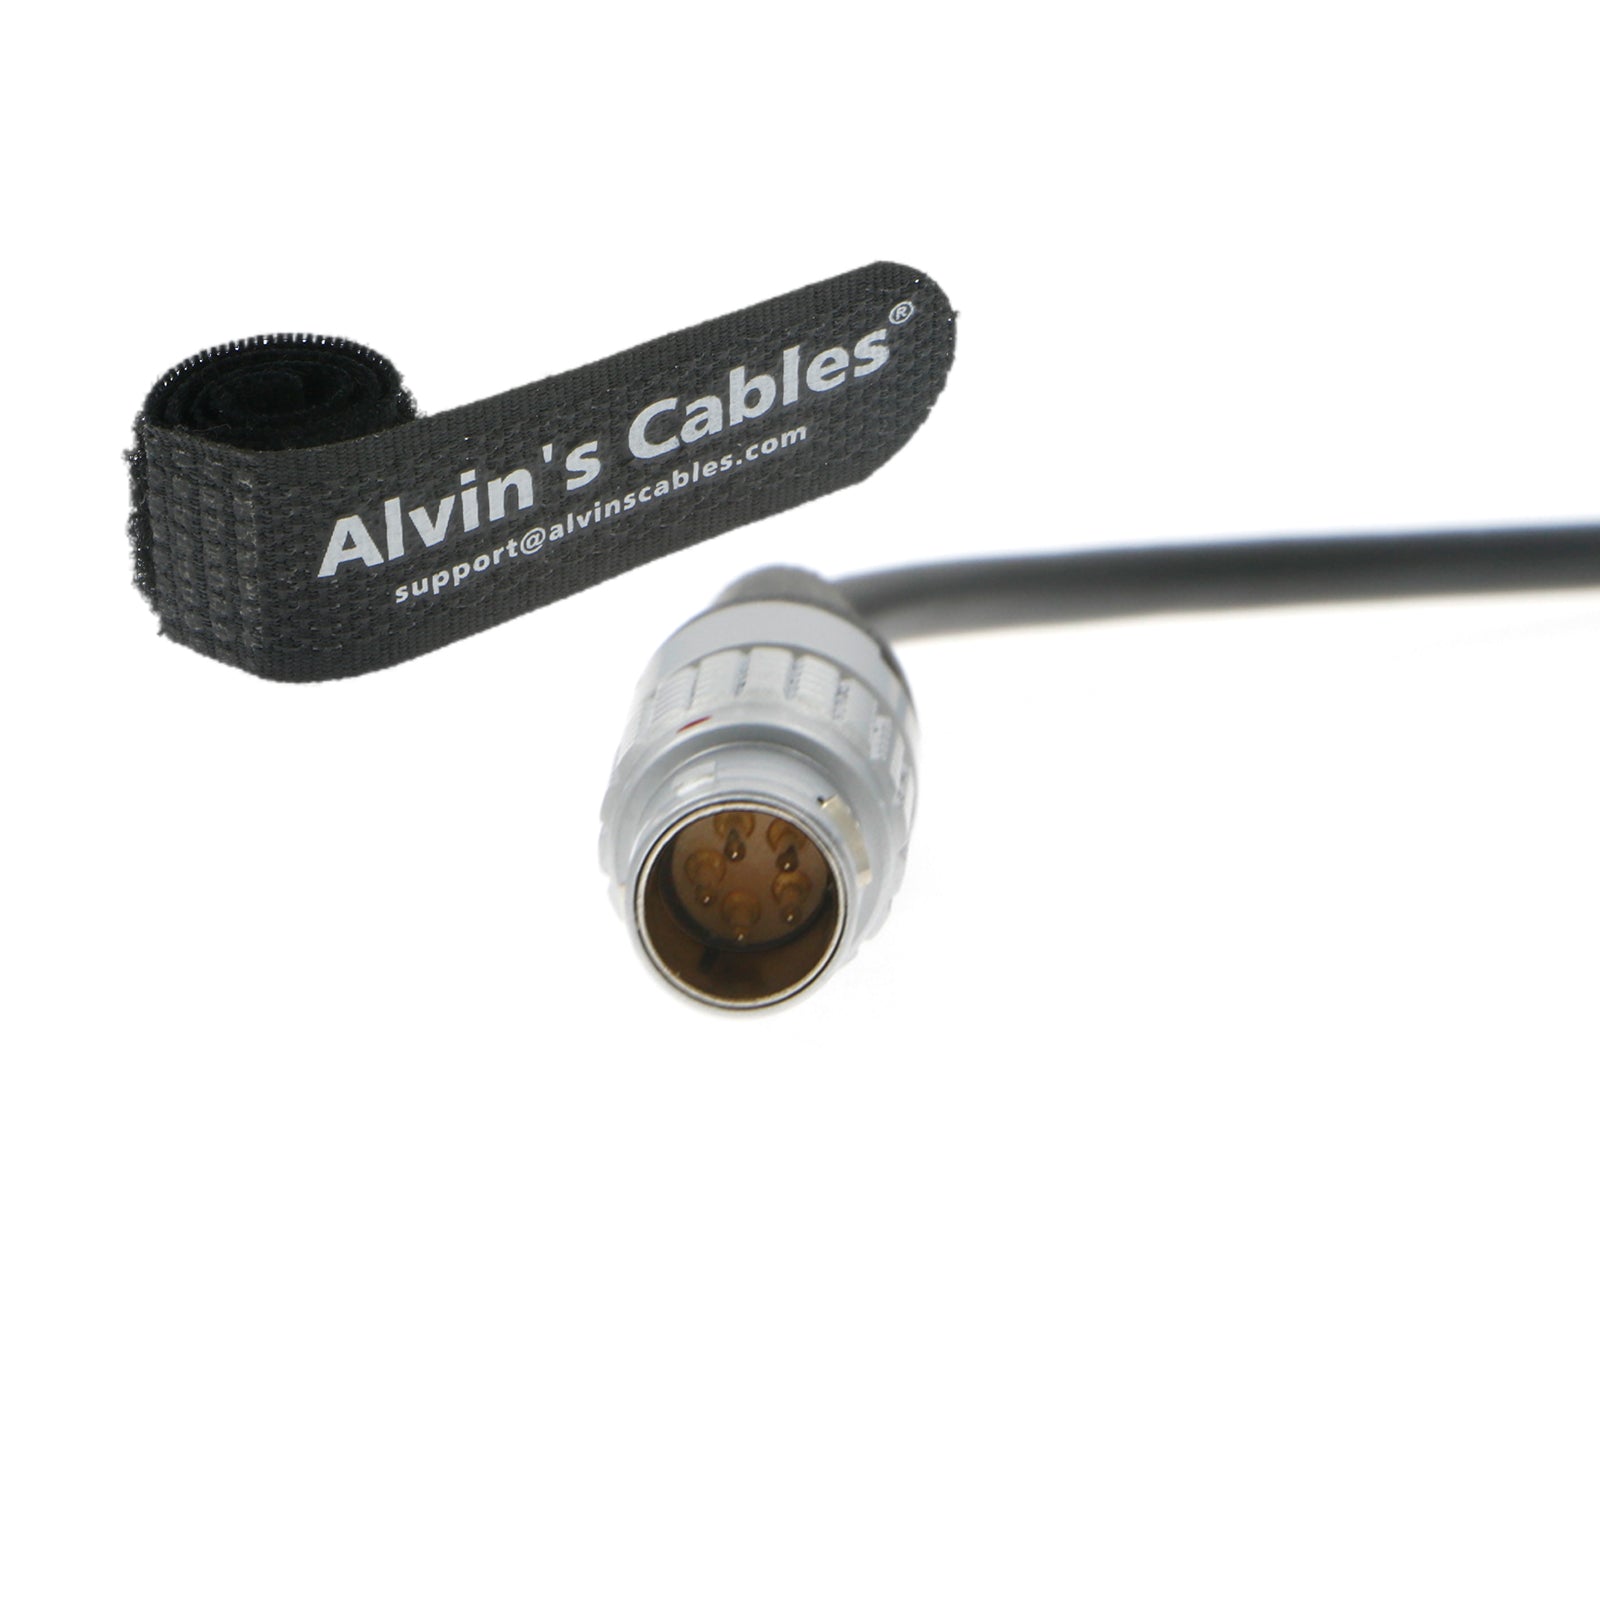 Alvin’s Cables RED-KOMODO Control-Cable for SMALLHD Focus PRO Monitor EXT 9 Pin to 5 Pin 55cm| 21.7inches